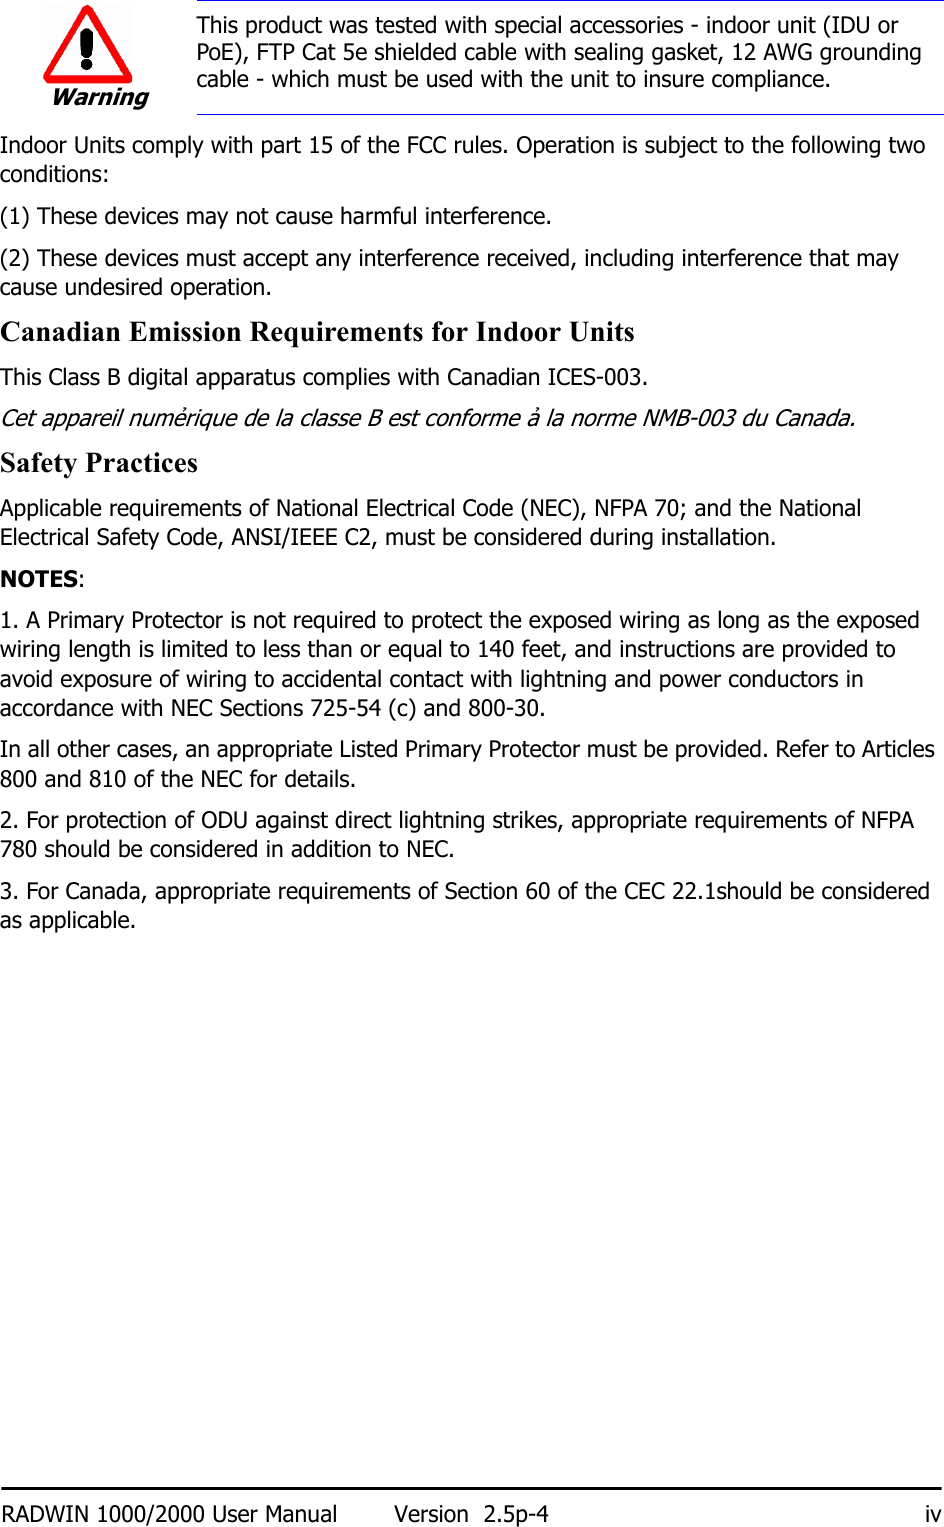 RADWIN 1000/2000 User Manual Version  2.5p-4 ivIndoor Units comply with part 15 of the FCC rules. Operation is subject to the following two conditions:(1) These devices may not cause harmful interference.(2) These devices must accept any interference received, including interference that may cause undesired operation.Canadian Emission Requirements for Indoor UnitsThis Class B digital apparatus complies with Canadian ICES-003.Cet appareil numẻrique de la classe B est conforme ả la norme NMB-003 du Canada.Safety PracticesApplicable requirements of National Electrical Code (NEC), NFPA 70; and the National Electrical Safety Code, ANSI/IEEE C2, must be considered during installation.NOTES:1. A Primary Protector is not required to protect the exposed wiring as long as the exposed wiring length is limited to less than or equal to 140 feet, and instructions are provided to avoid exposure of wiring to accidental contact with lightning and power conductors in accordance with NEC Sections 725-54 (c) and 800-30.In all other cases, an appropriate Listed Primary Protector must be provided. Refer to Articles 800 and 810 of the NEC for details.2. For protection of ODU against direct lightning strikes, appropriate requirements of NFPA 780 should be considered in addition to NEC.3. For Canada, appropriate requirements of Section 60 of the CEC 22.1should be considered as applicable.WarningThis product was tested with special accessories - indoor unit (IDU or PoE), FTP Cat 5e shielded cable with sealing gasket, 12 AWG grounding cable - which must be used with the unit to insure compliance.